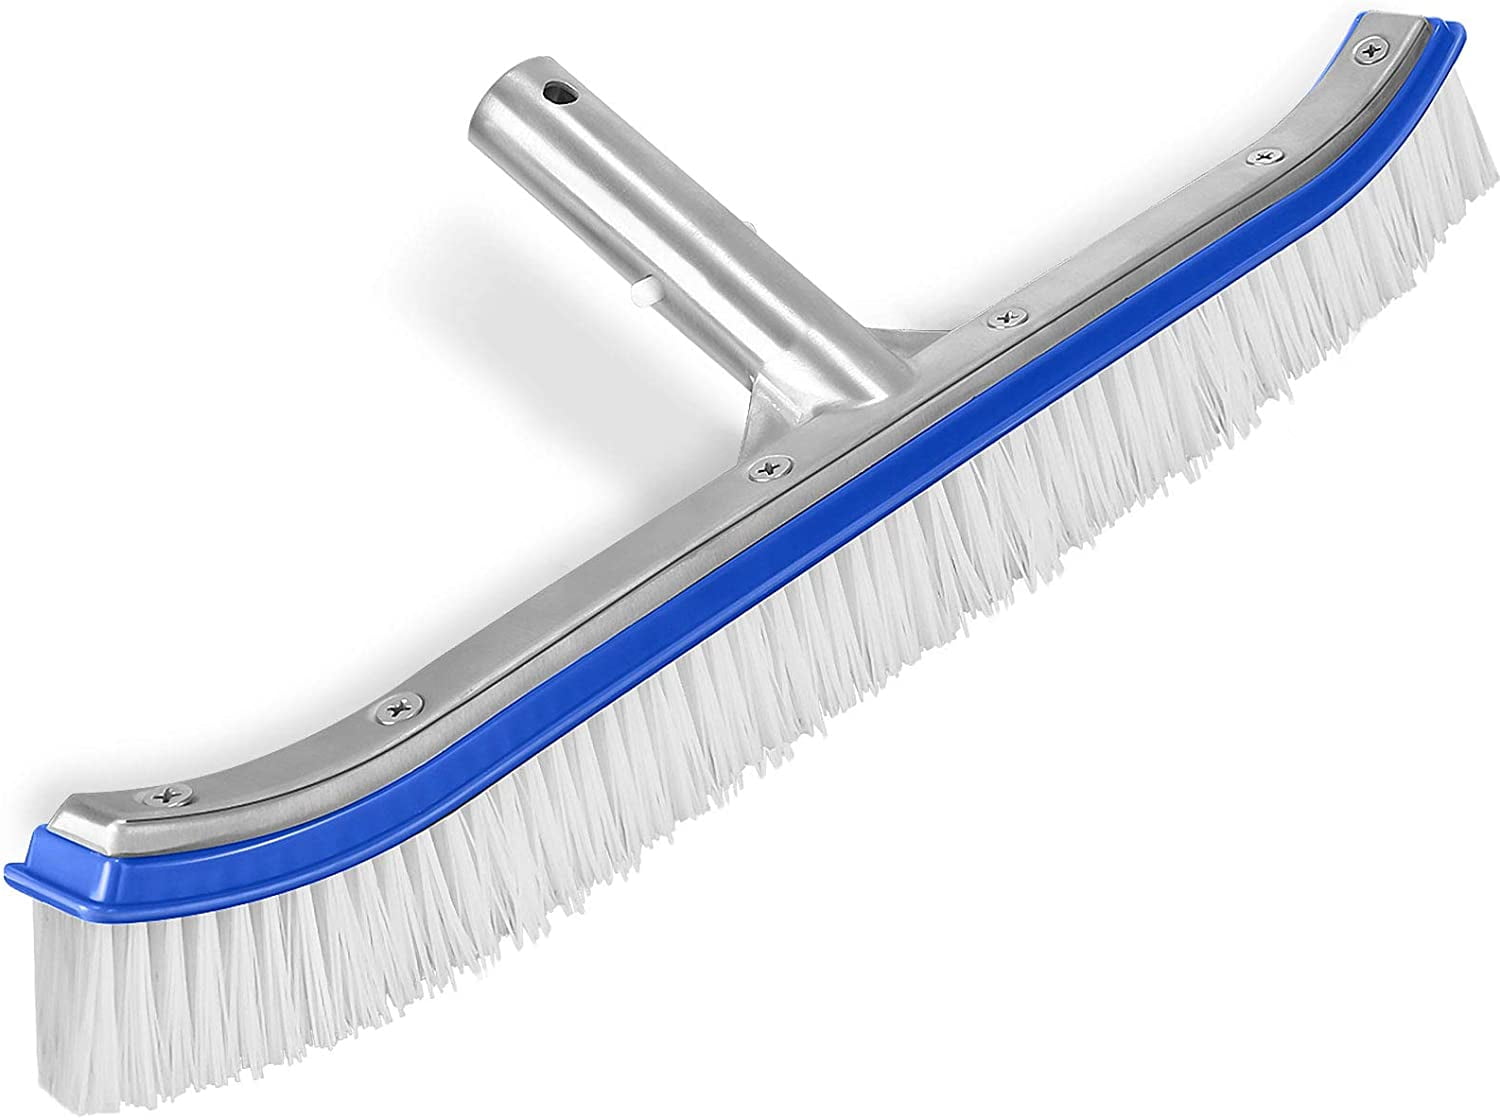 Puri Tech Premium Quality Curved 18 Inch Pool Cleaning Brush with Mixed Nylon & Stainless Steel Bristles & Aluminum Backing for Swimming Pools & Spas 